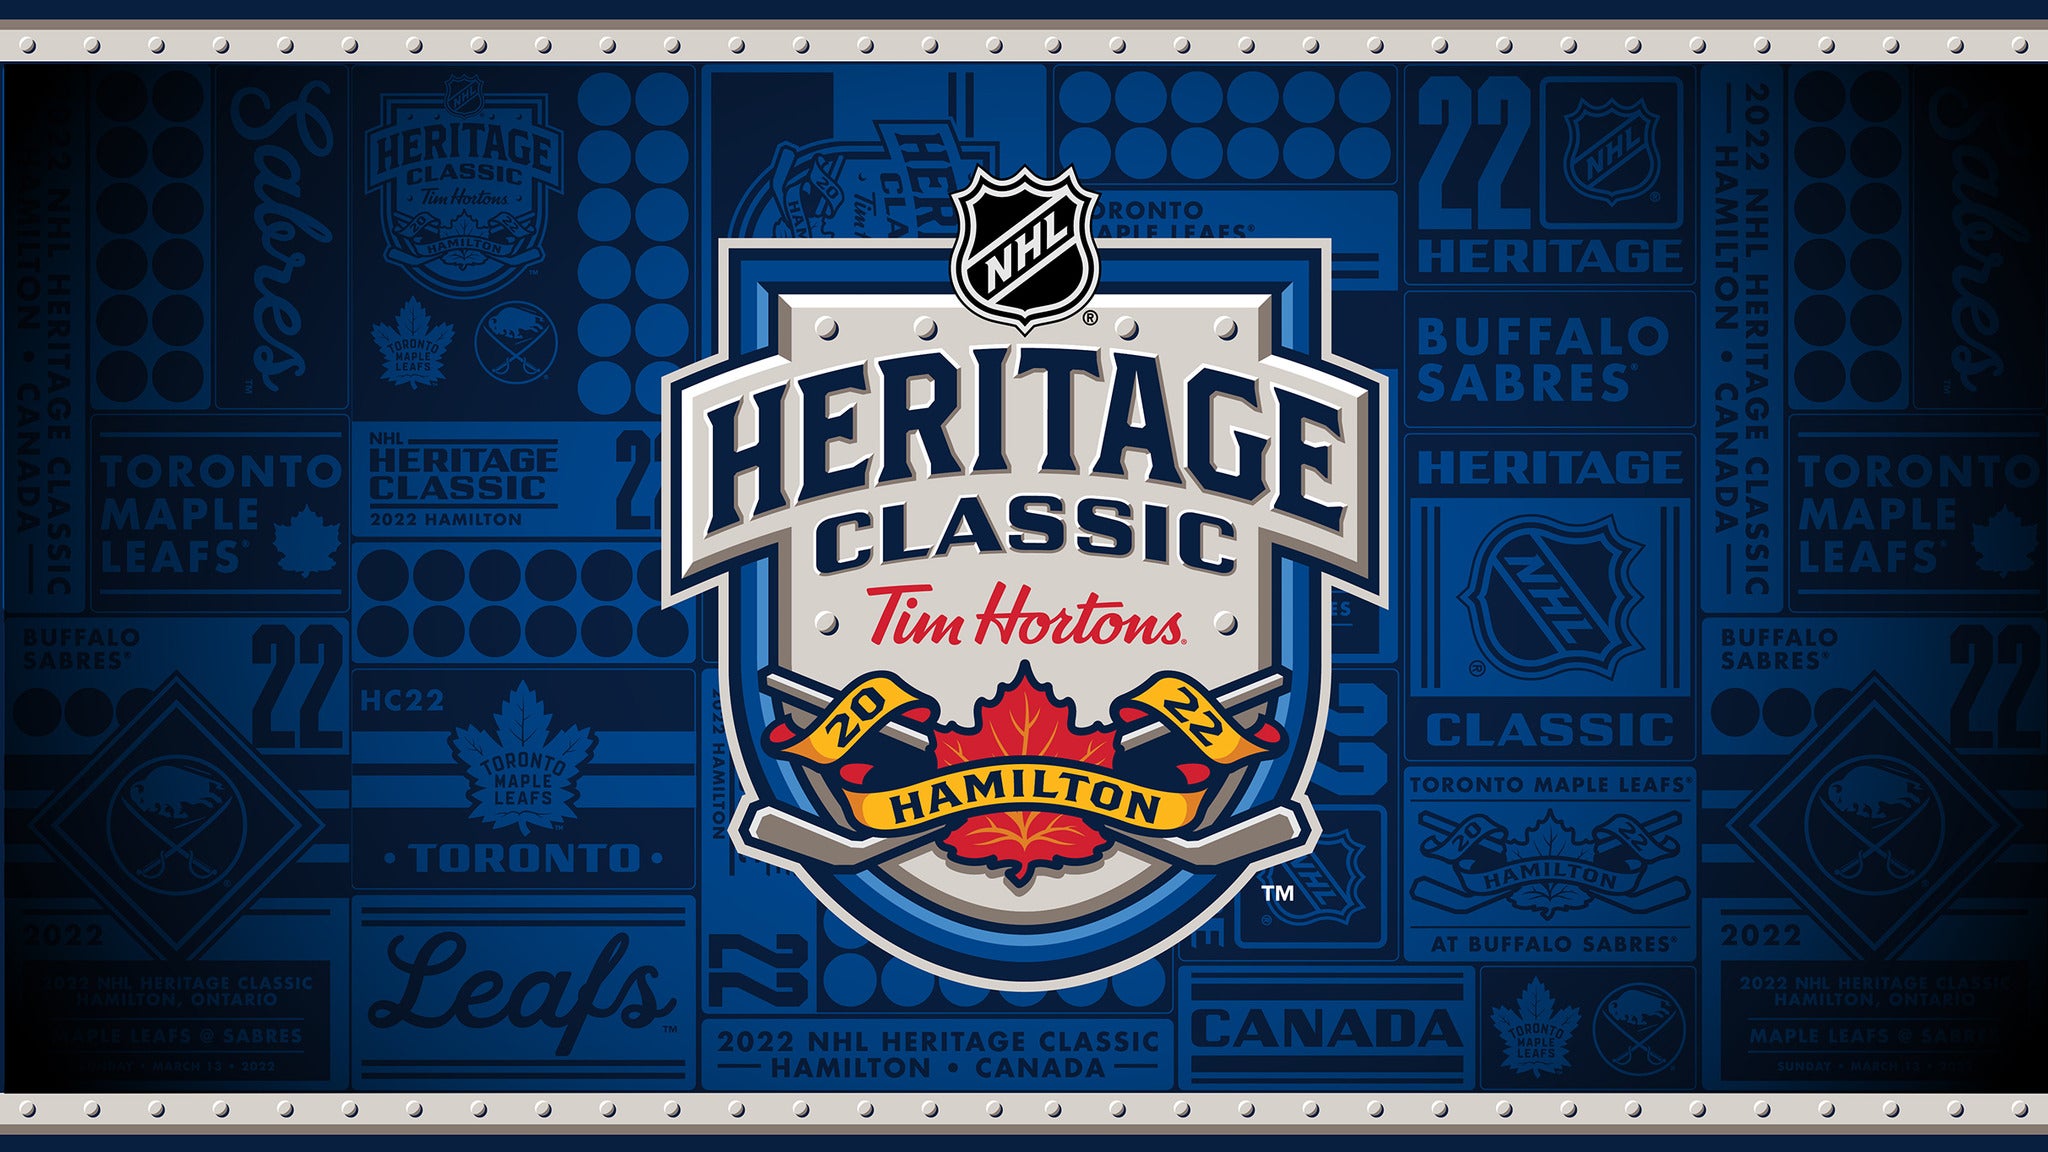 NHL Heritage Classic Tickets 2022 NHL Tickets & Schedule